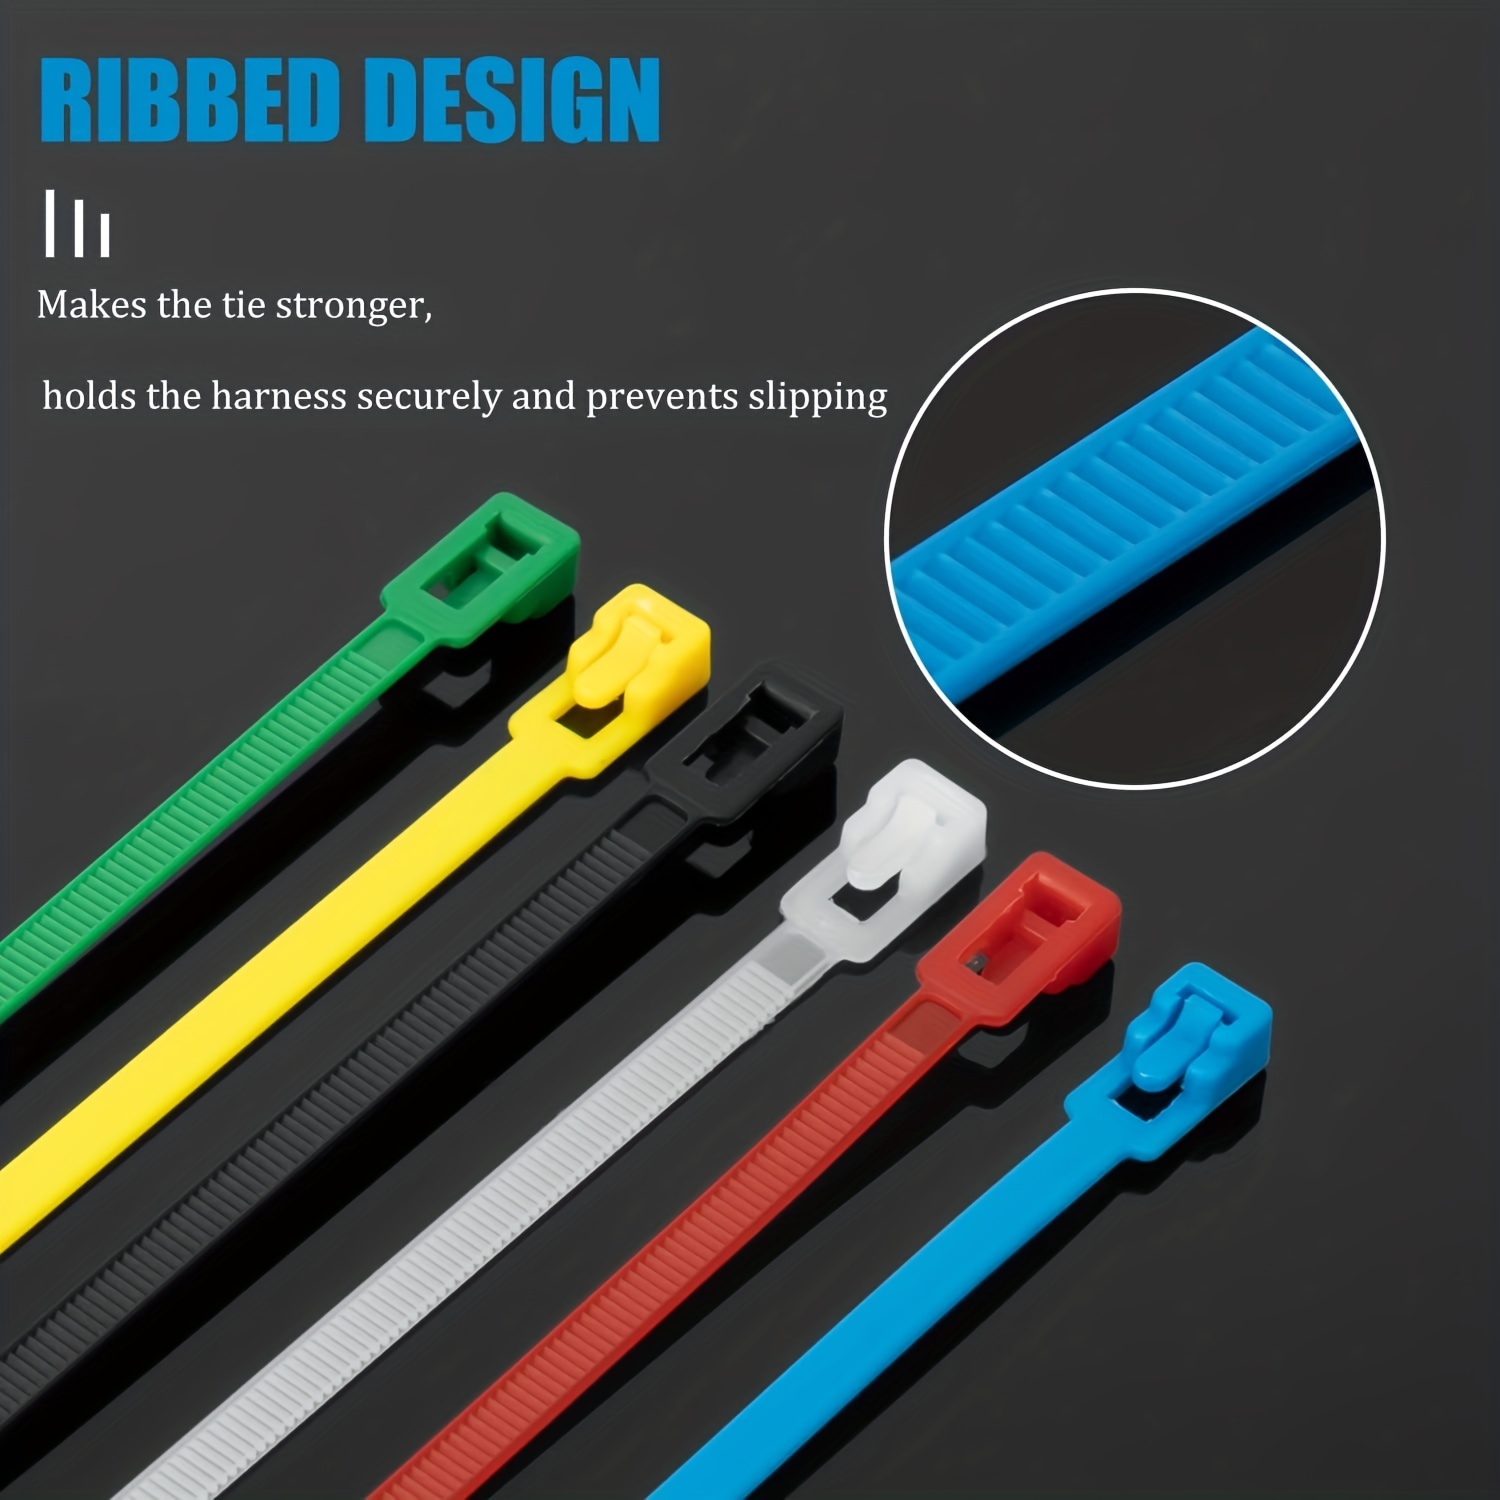 Releasable Reusable Zip Ties 12 Inch Heavy Duty Zip Tie Thick Black Cable  Ties Reusable 100 Pack 50lb Tensile Strength Nylon Cable Wire Ties for